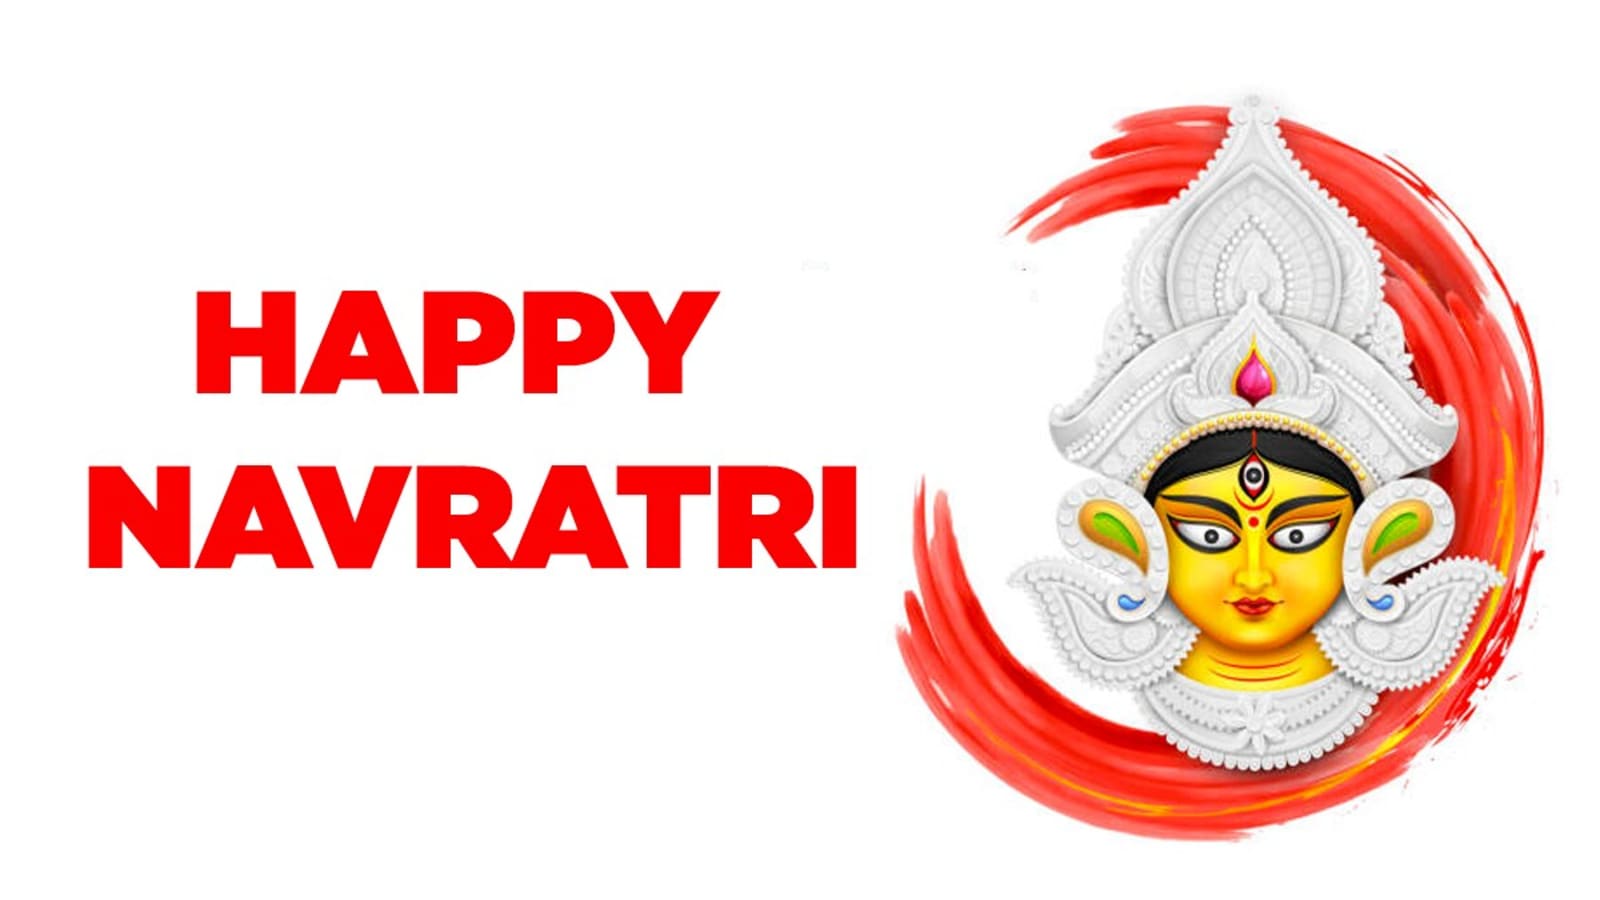 Happy Navratri 2021 Wishes, images, messages, and greetings to send